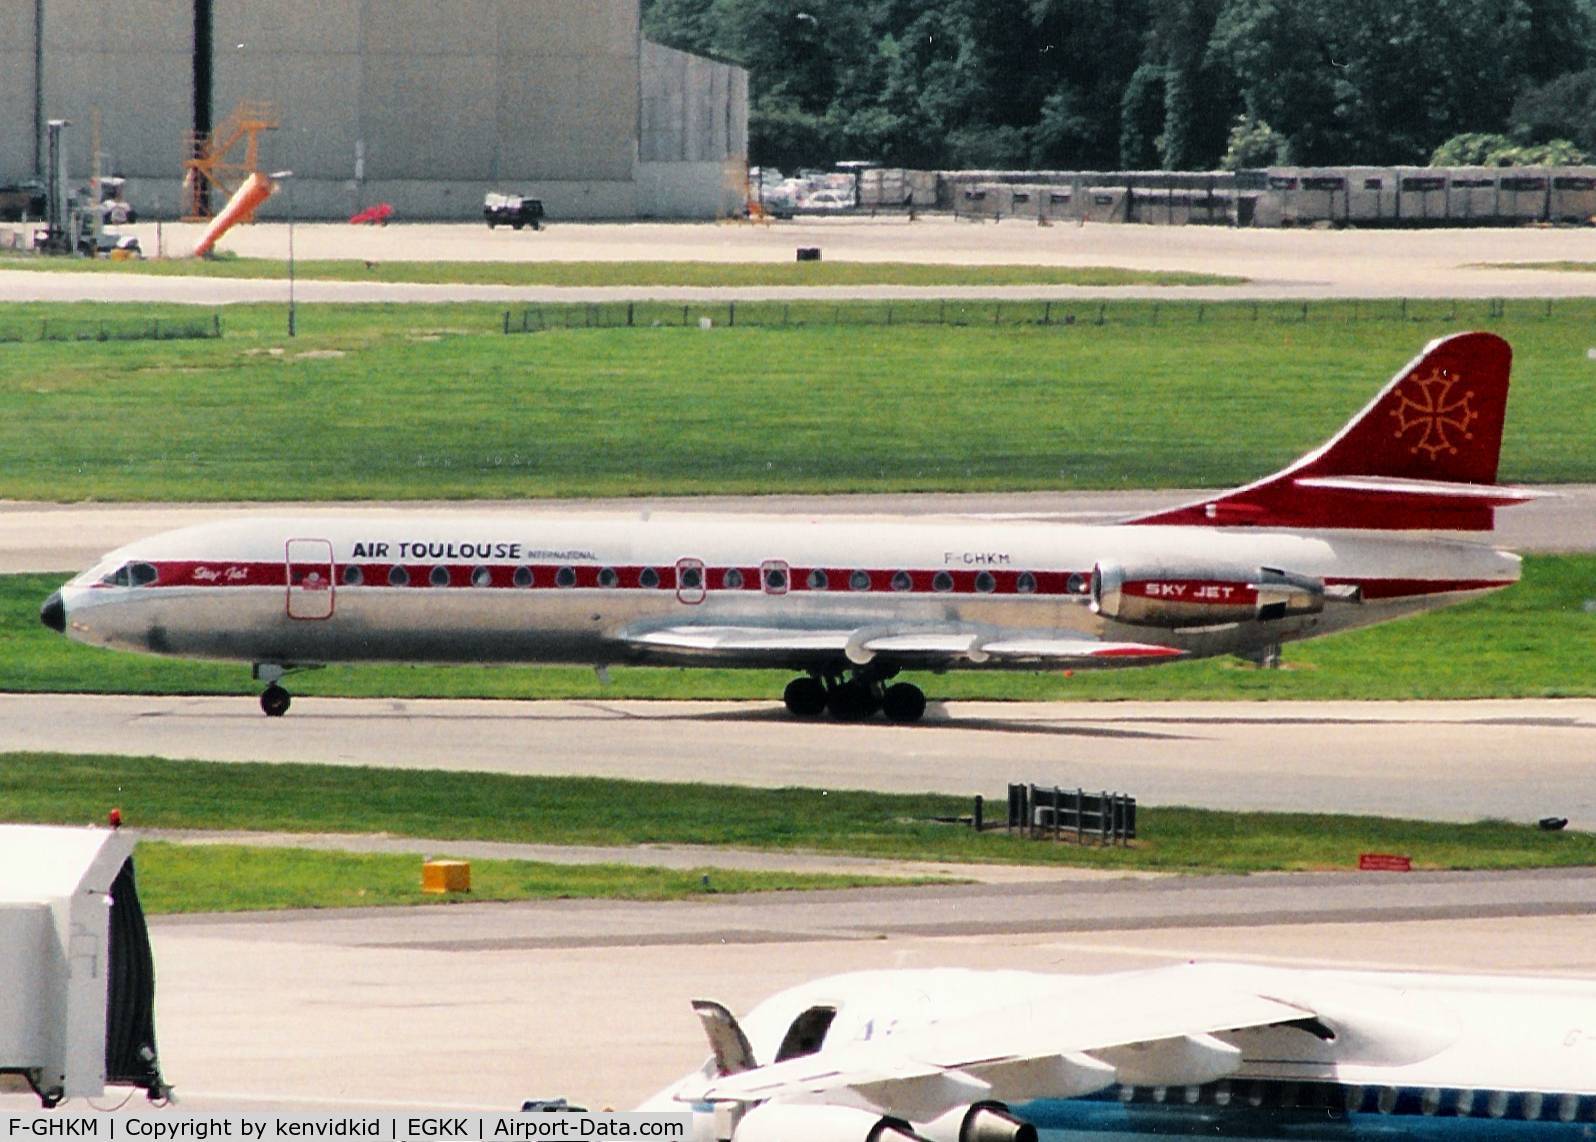 F-GHKM, 1969 Sud Aviation SE-210 Caravelle 10B3 Super B C/N 262, Air Toulouse